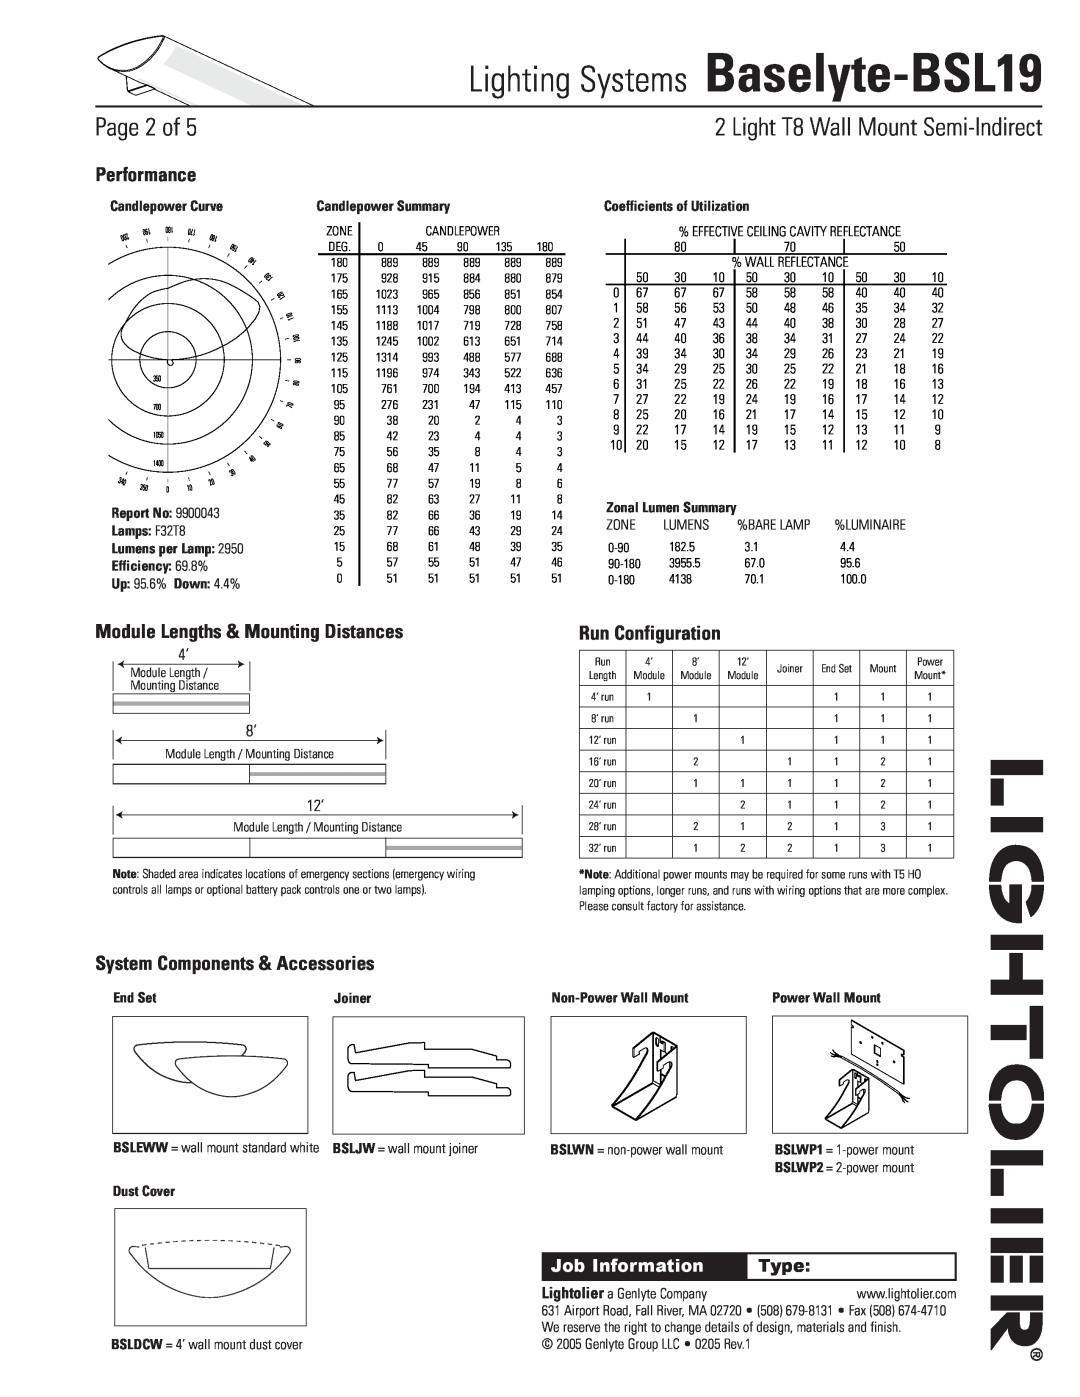 Lightolier Lighting Systems Baselyte-BSL19, Page of, Light T8 Wall Mount Semi-Indirect, Performance, Run Configuration 